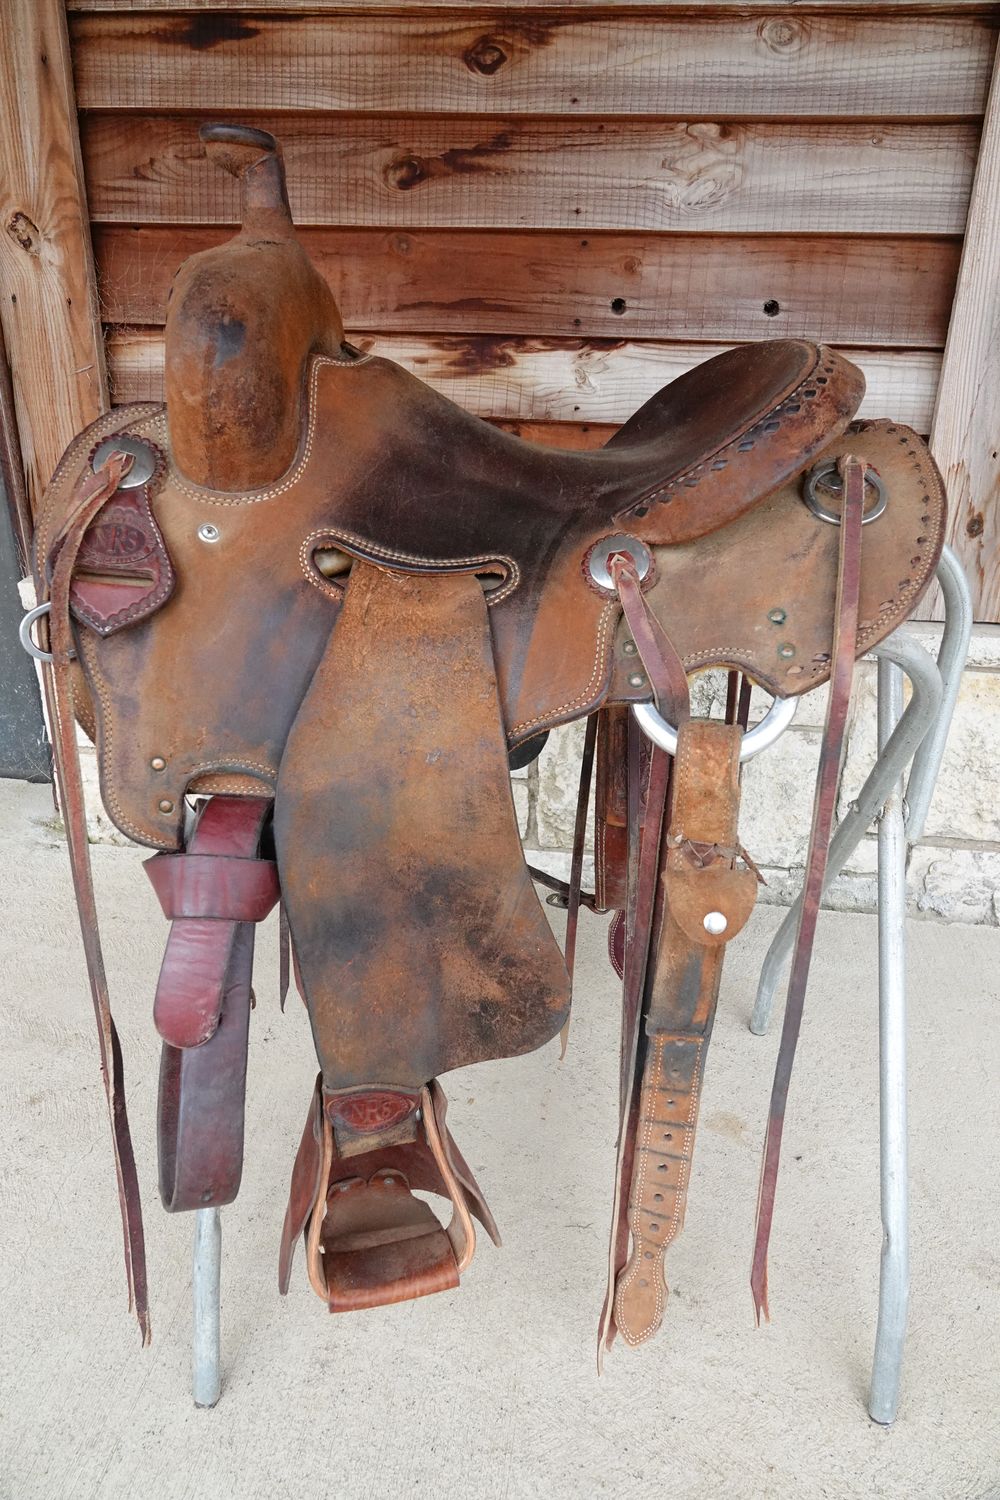 14" youth NRS ranch cutter saddle - $1,500